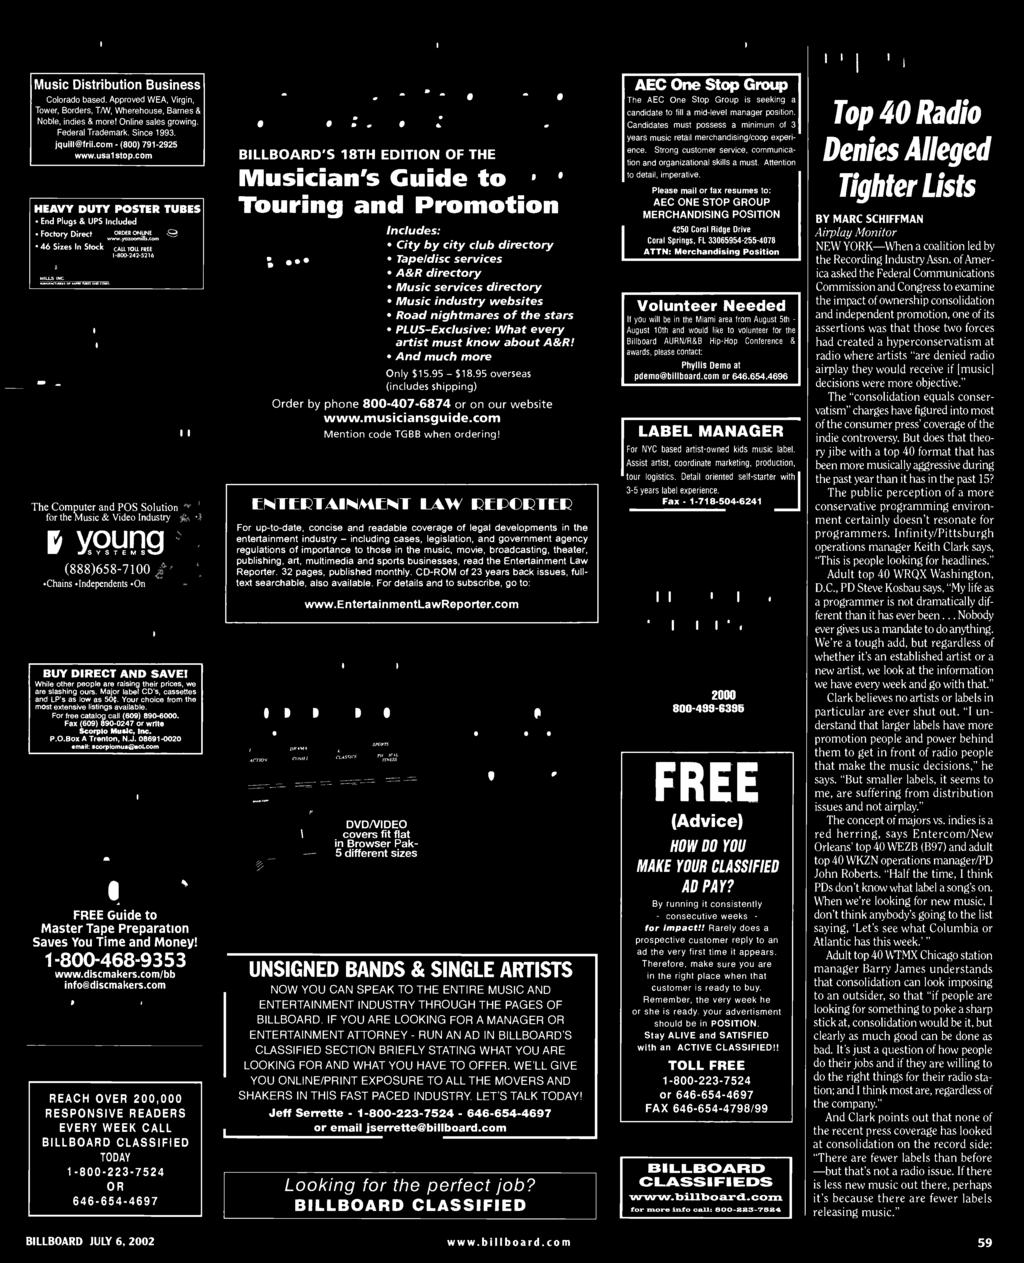 CD -ROM of years back issues, full - text searchable, also available. For details and to subscribe, go to: www.entertainmentlawreporter.com *BROWSER" DISPLAY SYSTEMS* 0 DVD /VIDEO TITLES in SQ. FT.